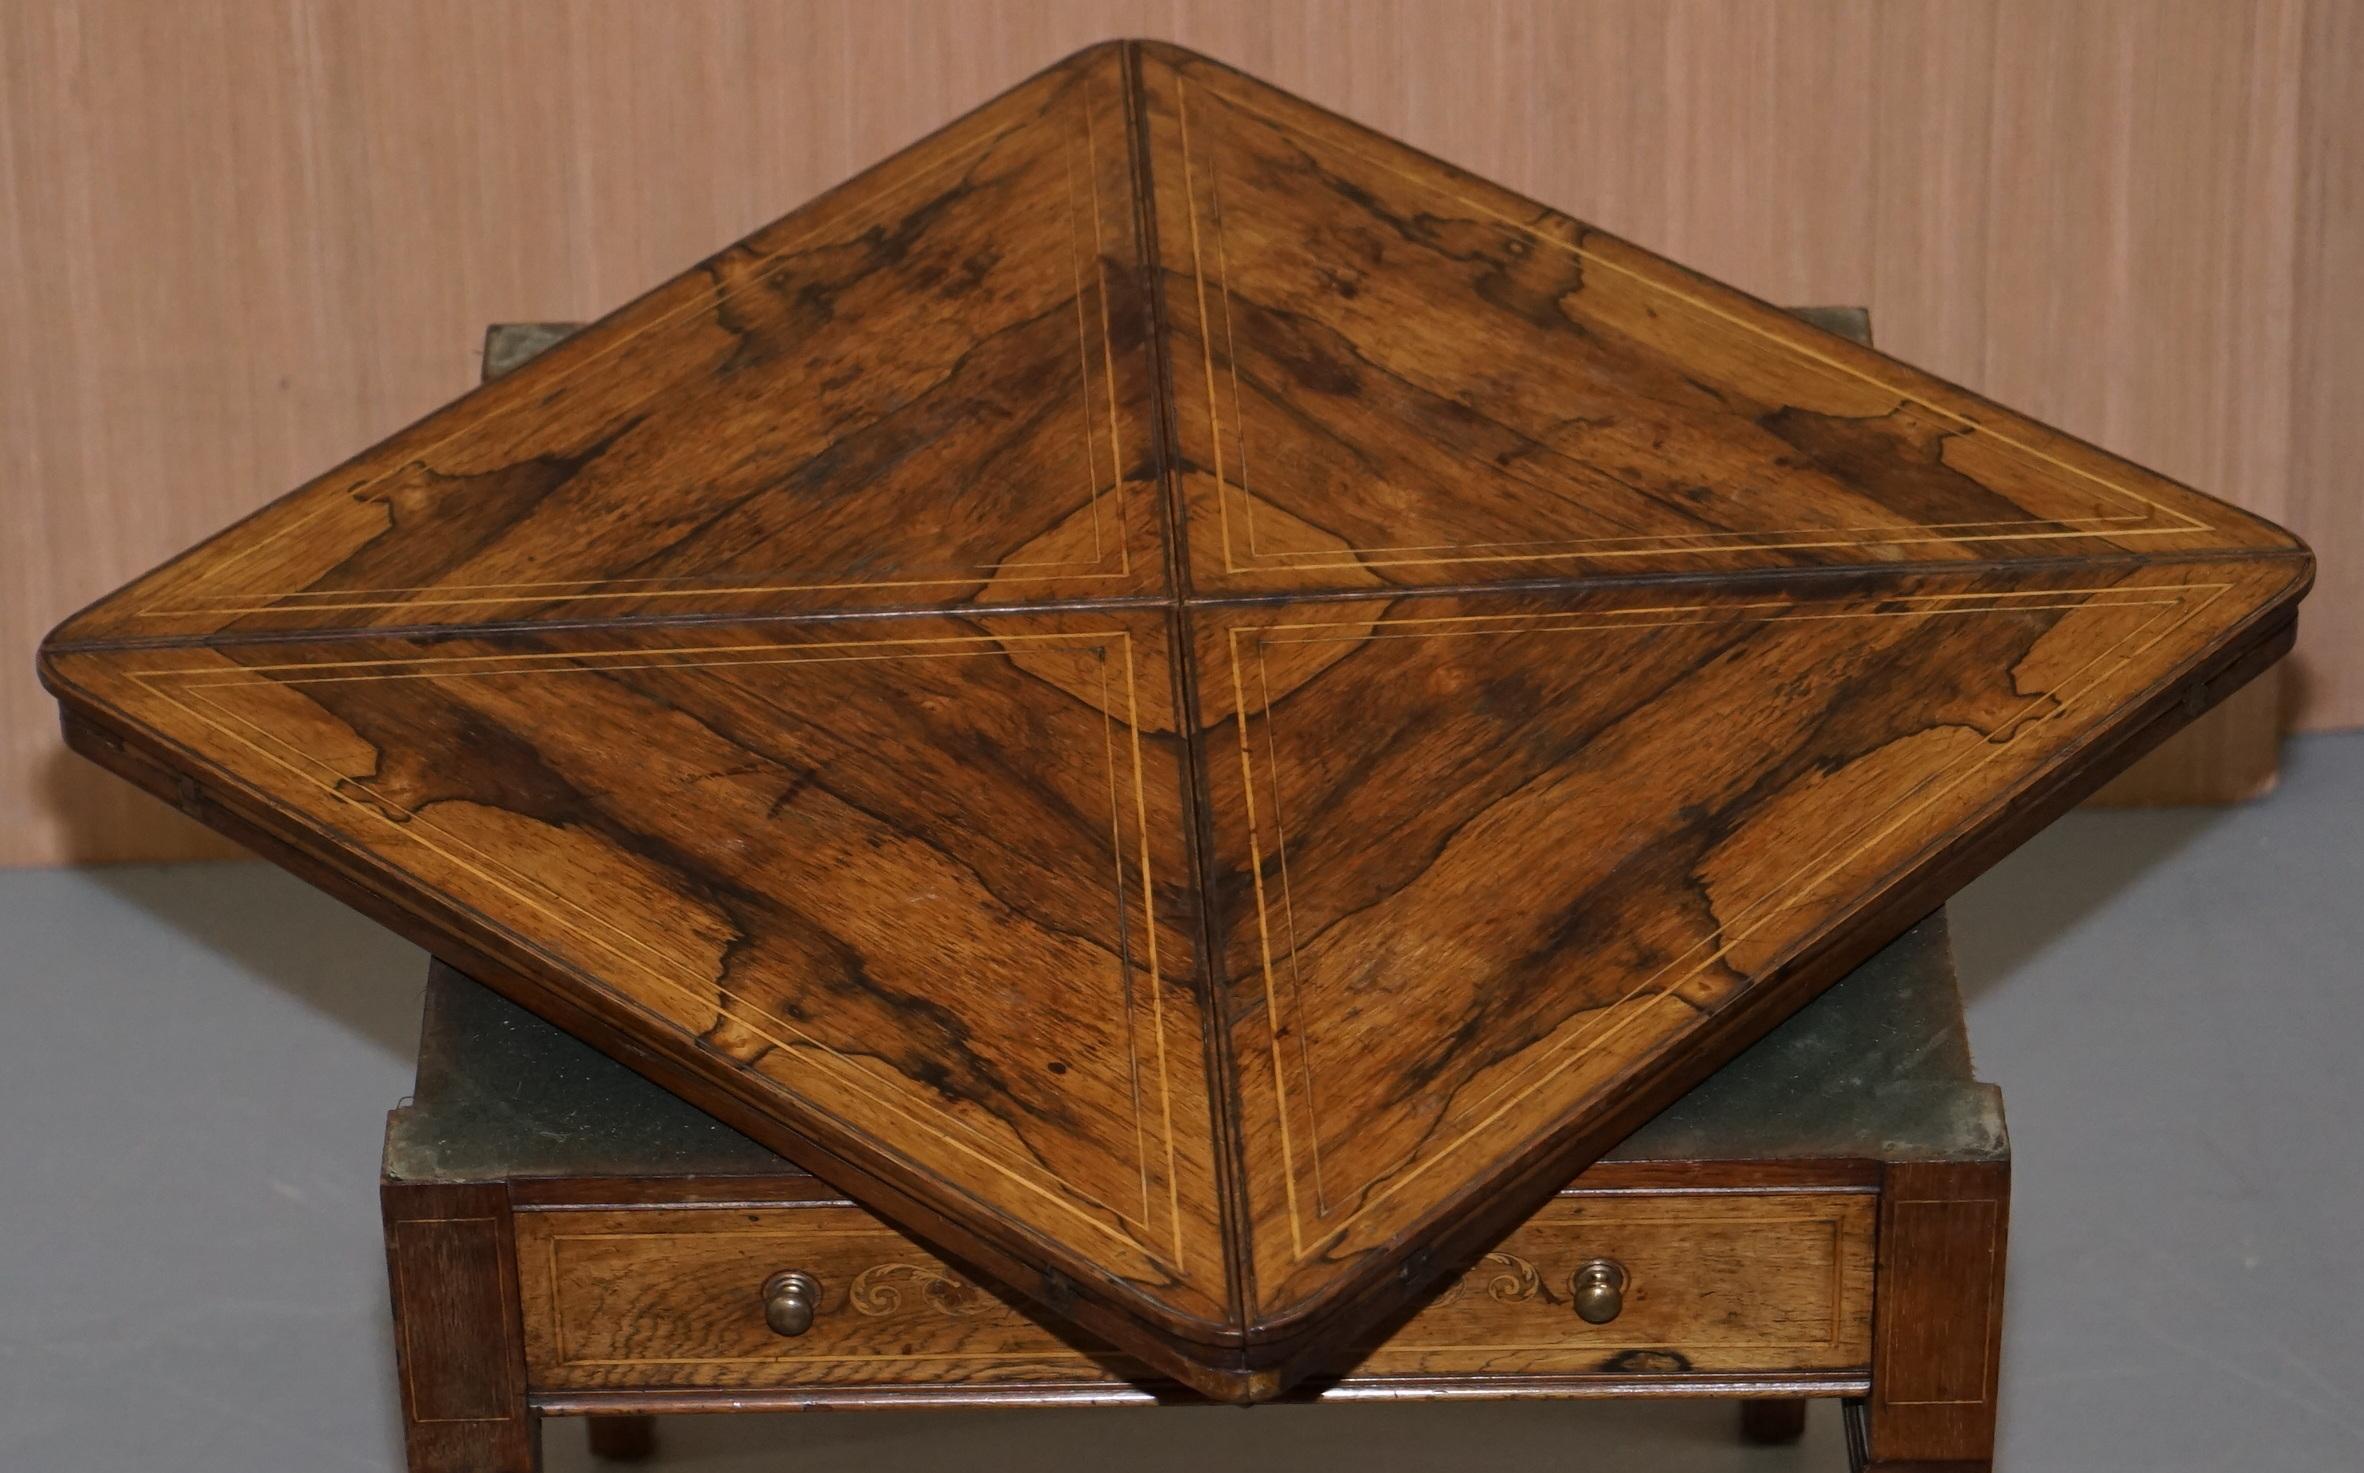 Victorian Mahogany Games Envelope Rare Wood Table circa 1880 Unfolds Extends 11